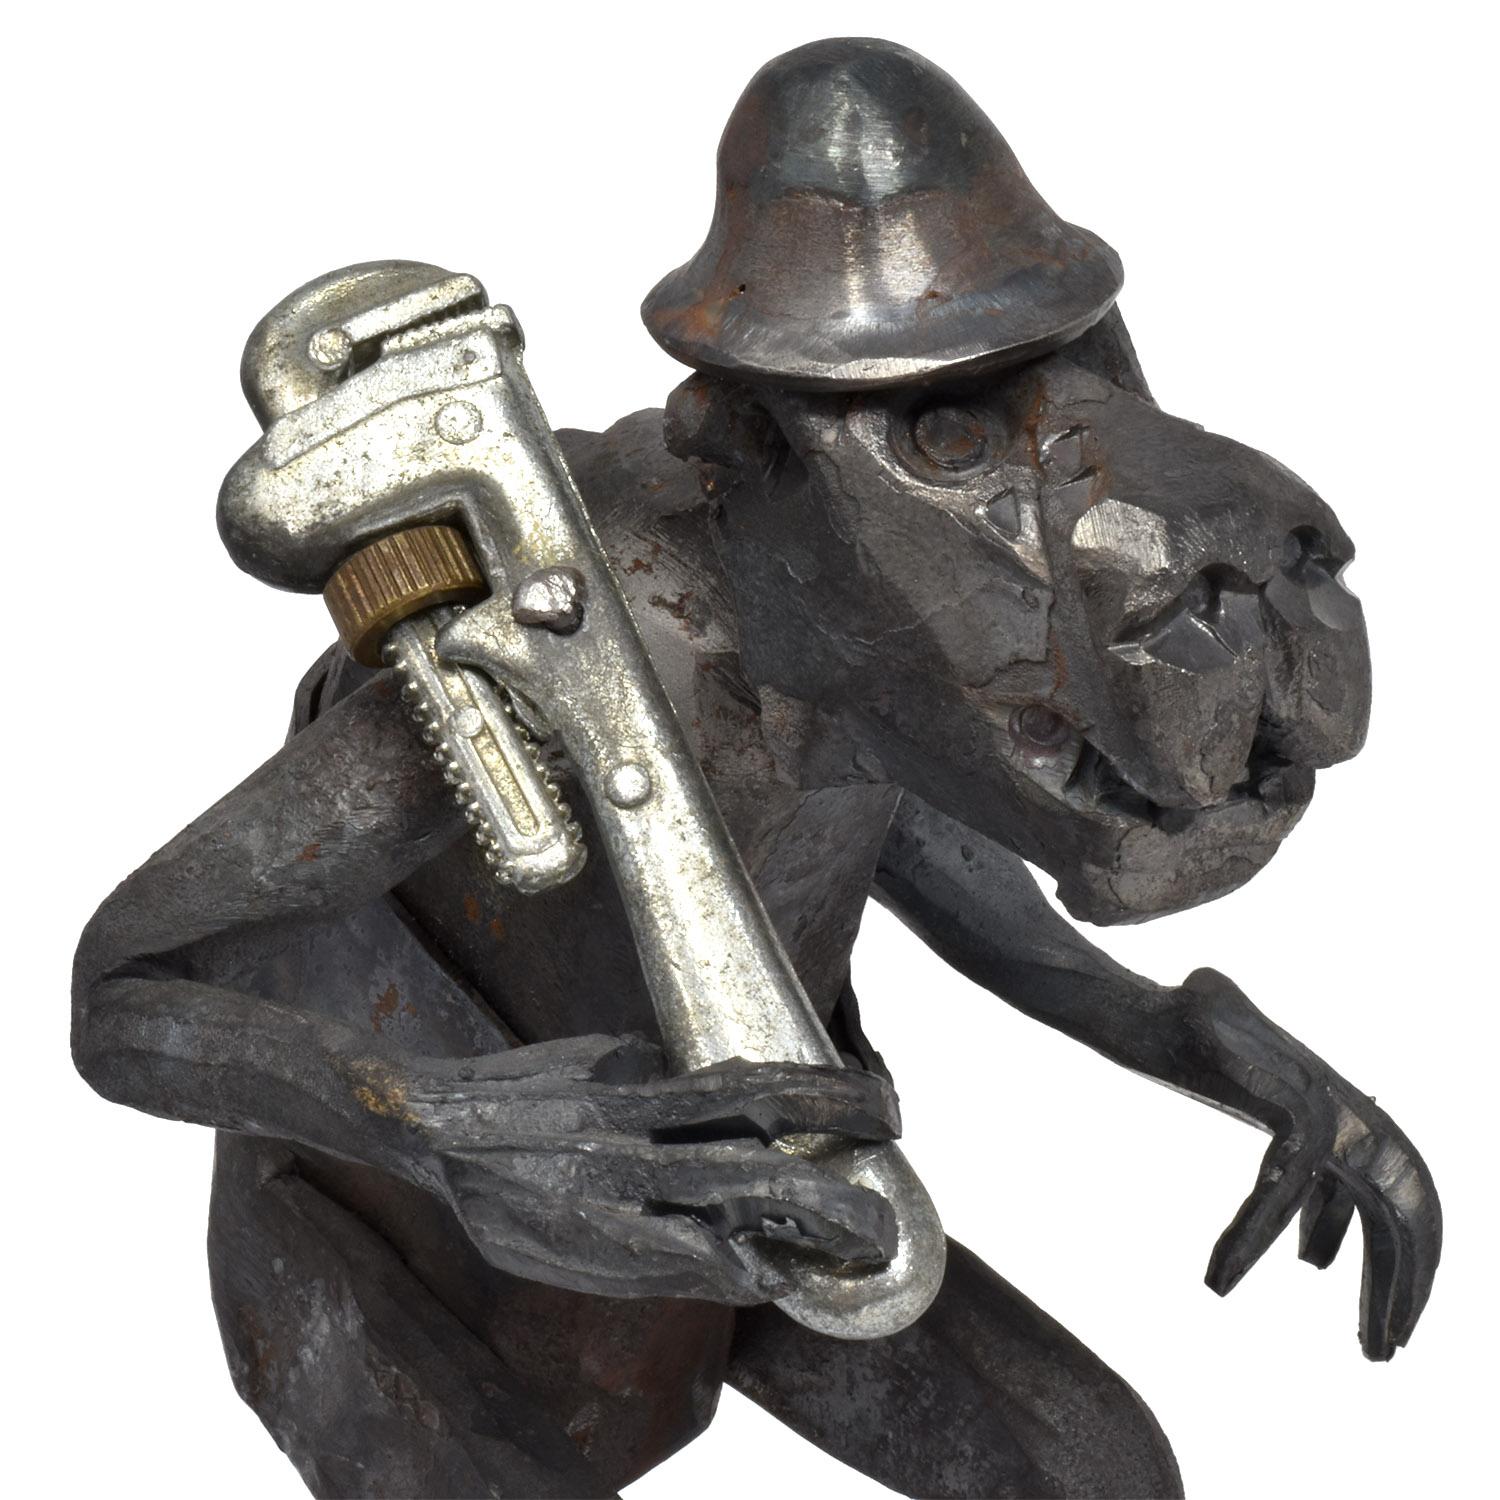 17th century artists monkey wrench